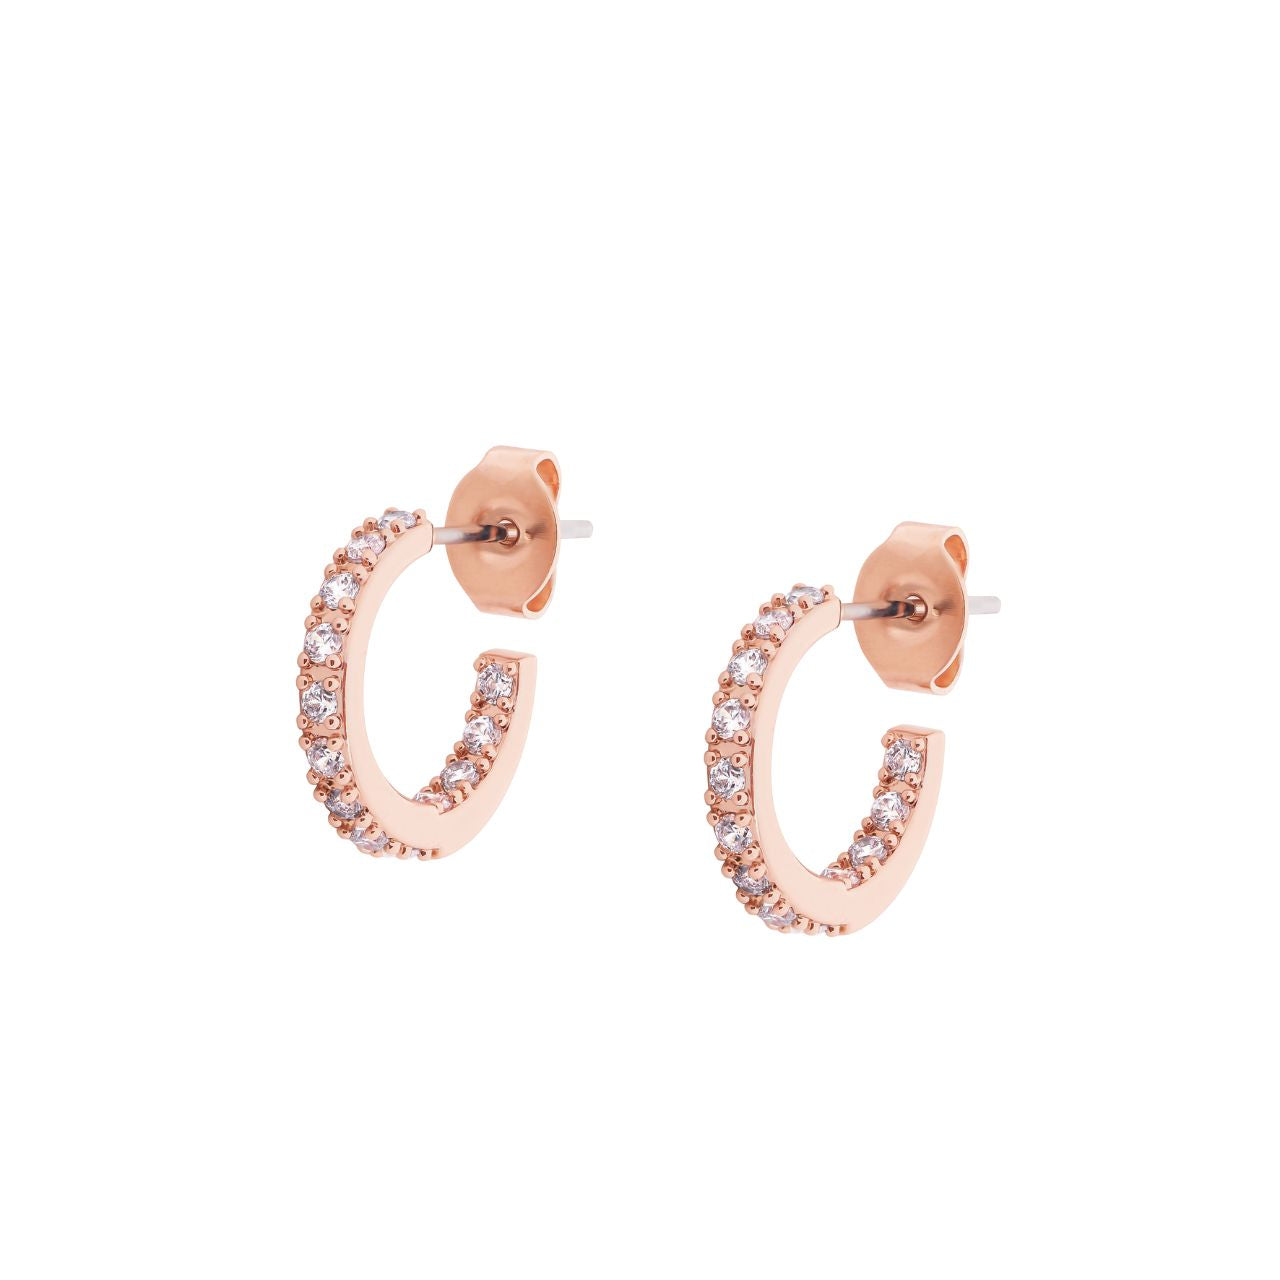 Circle Pave Rose Gold Small Hoop Earrings by Tipperary Crystal  Replenish your jewellery collection with this intricate pair of Tipperary Crystal Circle Pave Rose Gold Small Hoop Earrings.